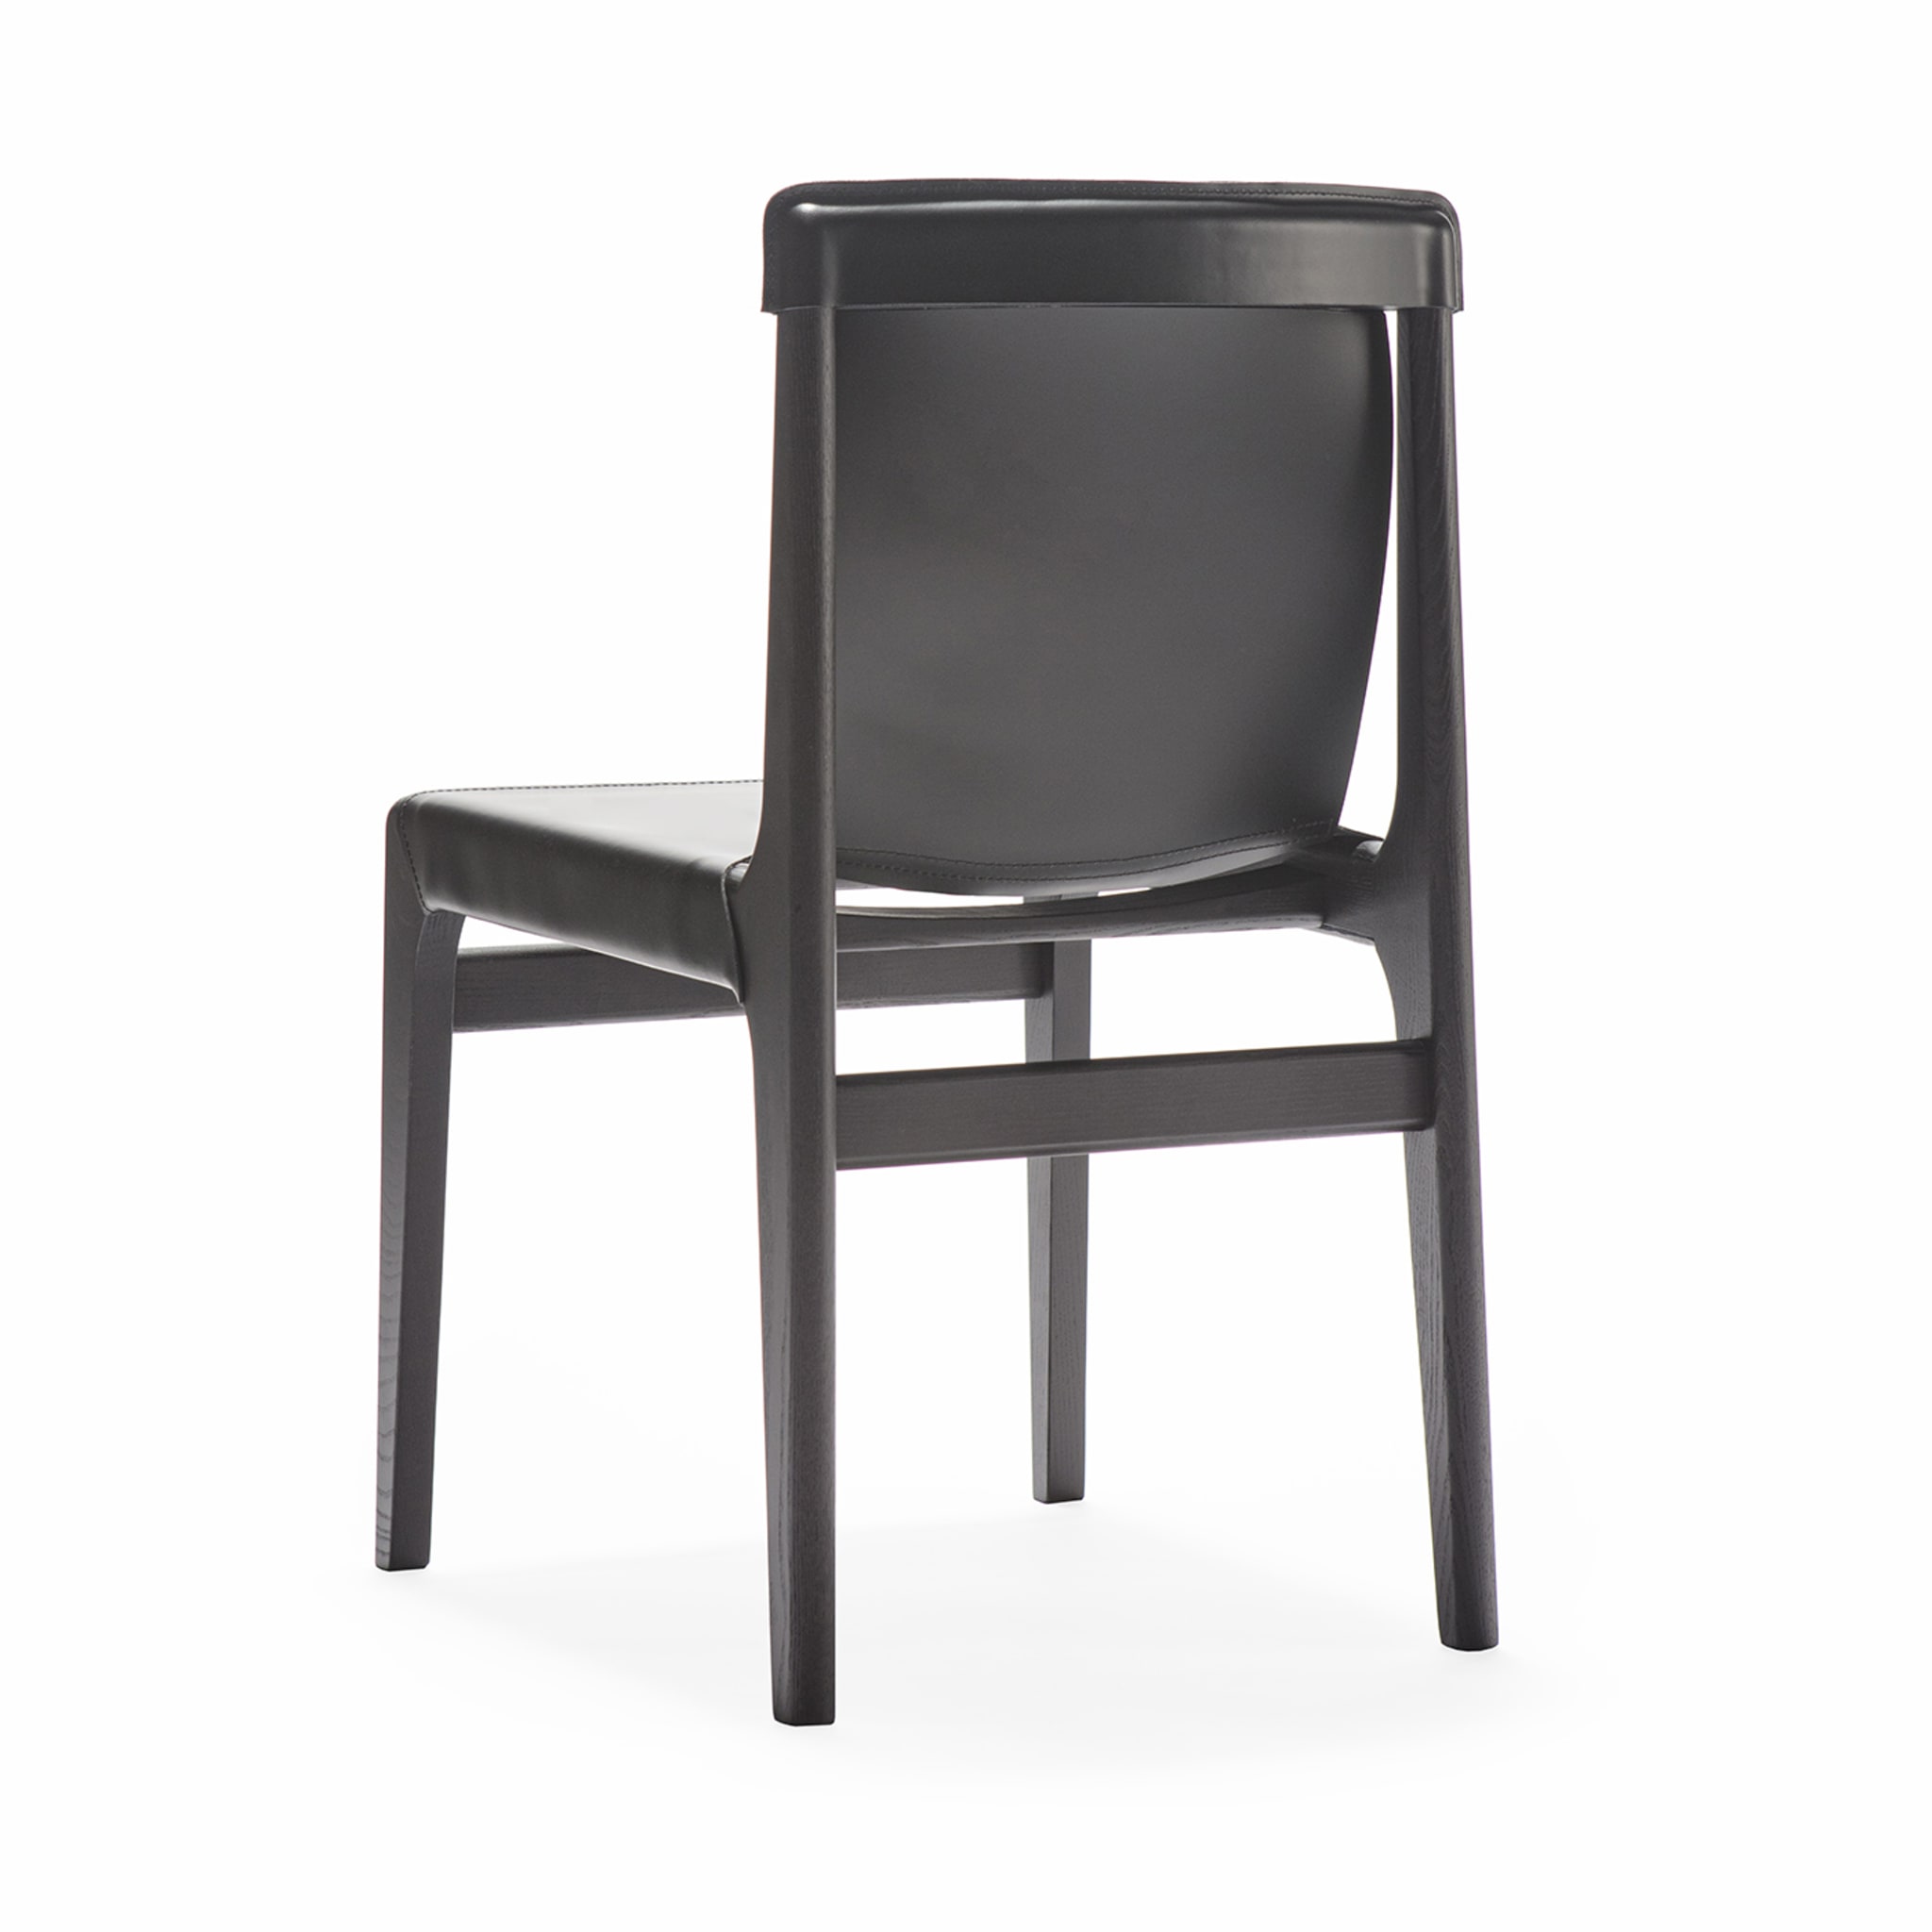 Burano Black Leather Chair by Balutto Associati - Alternative view 1